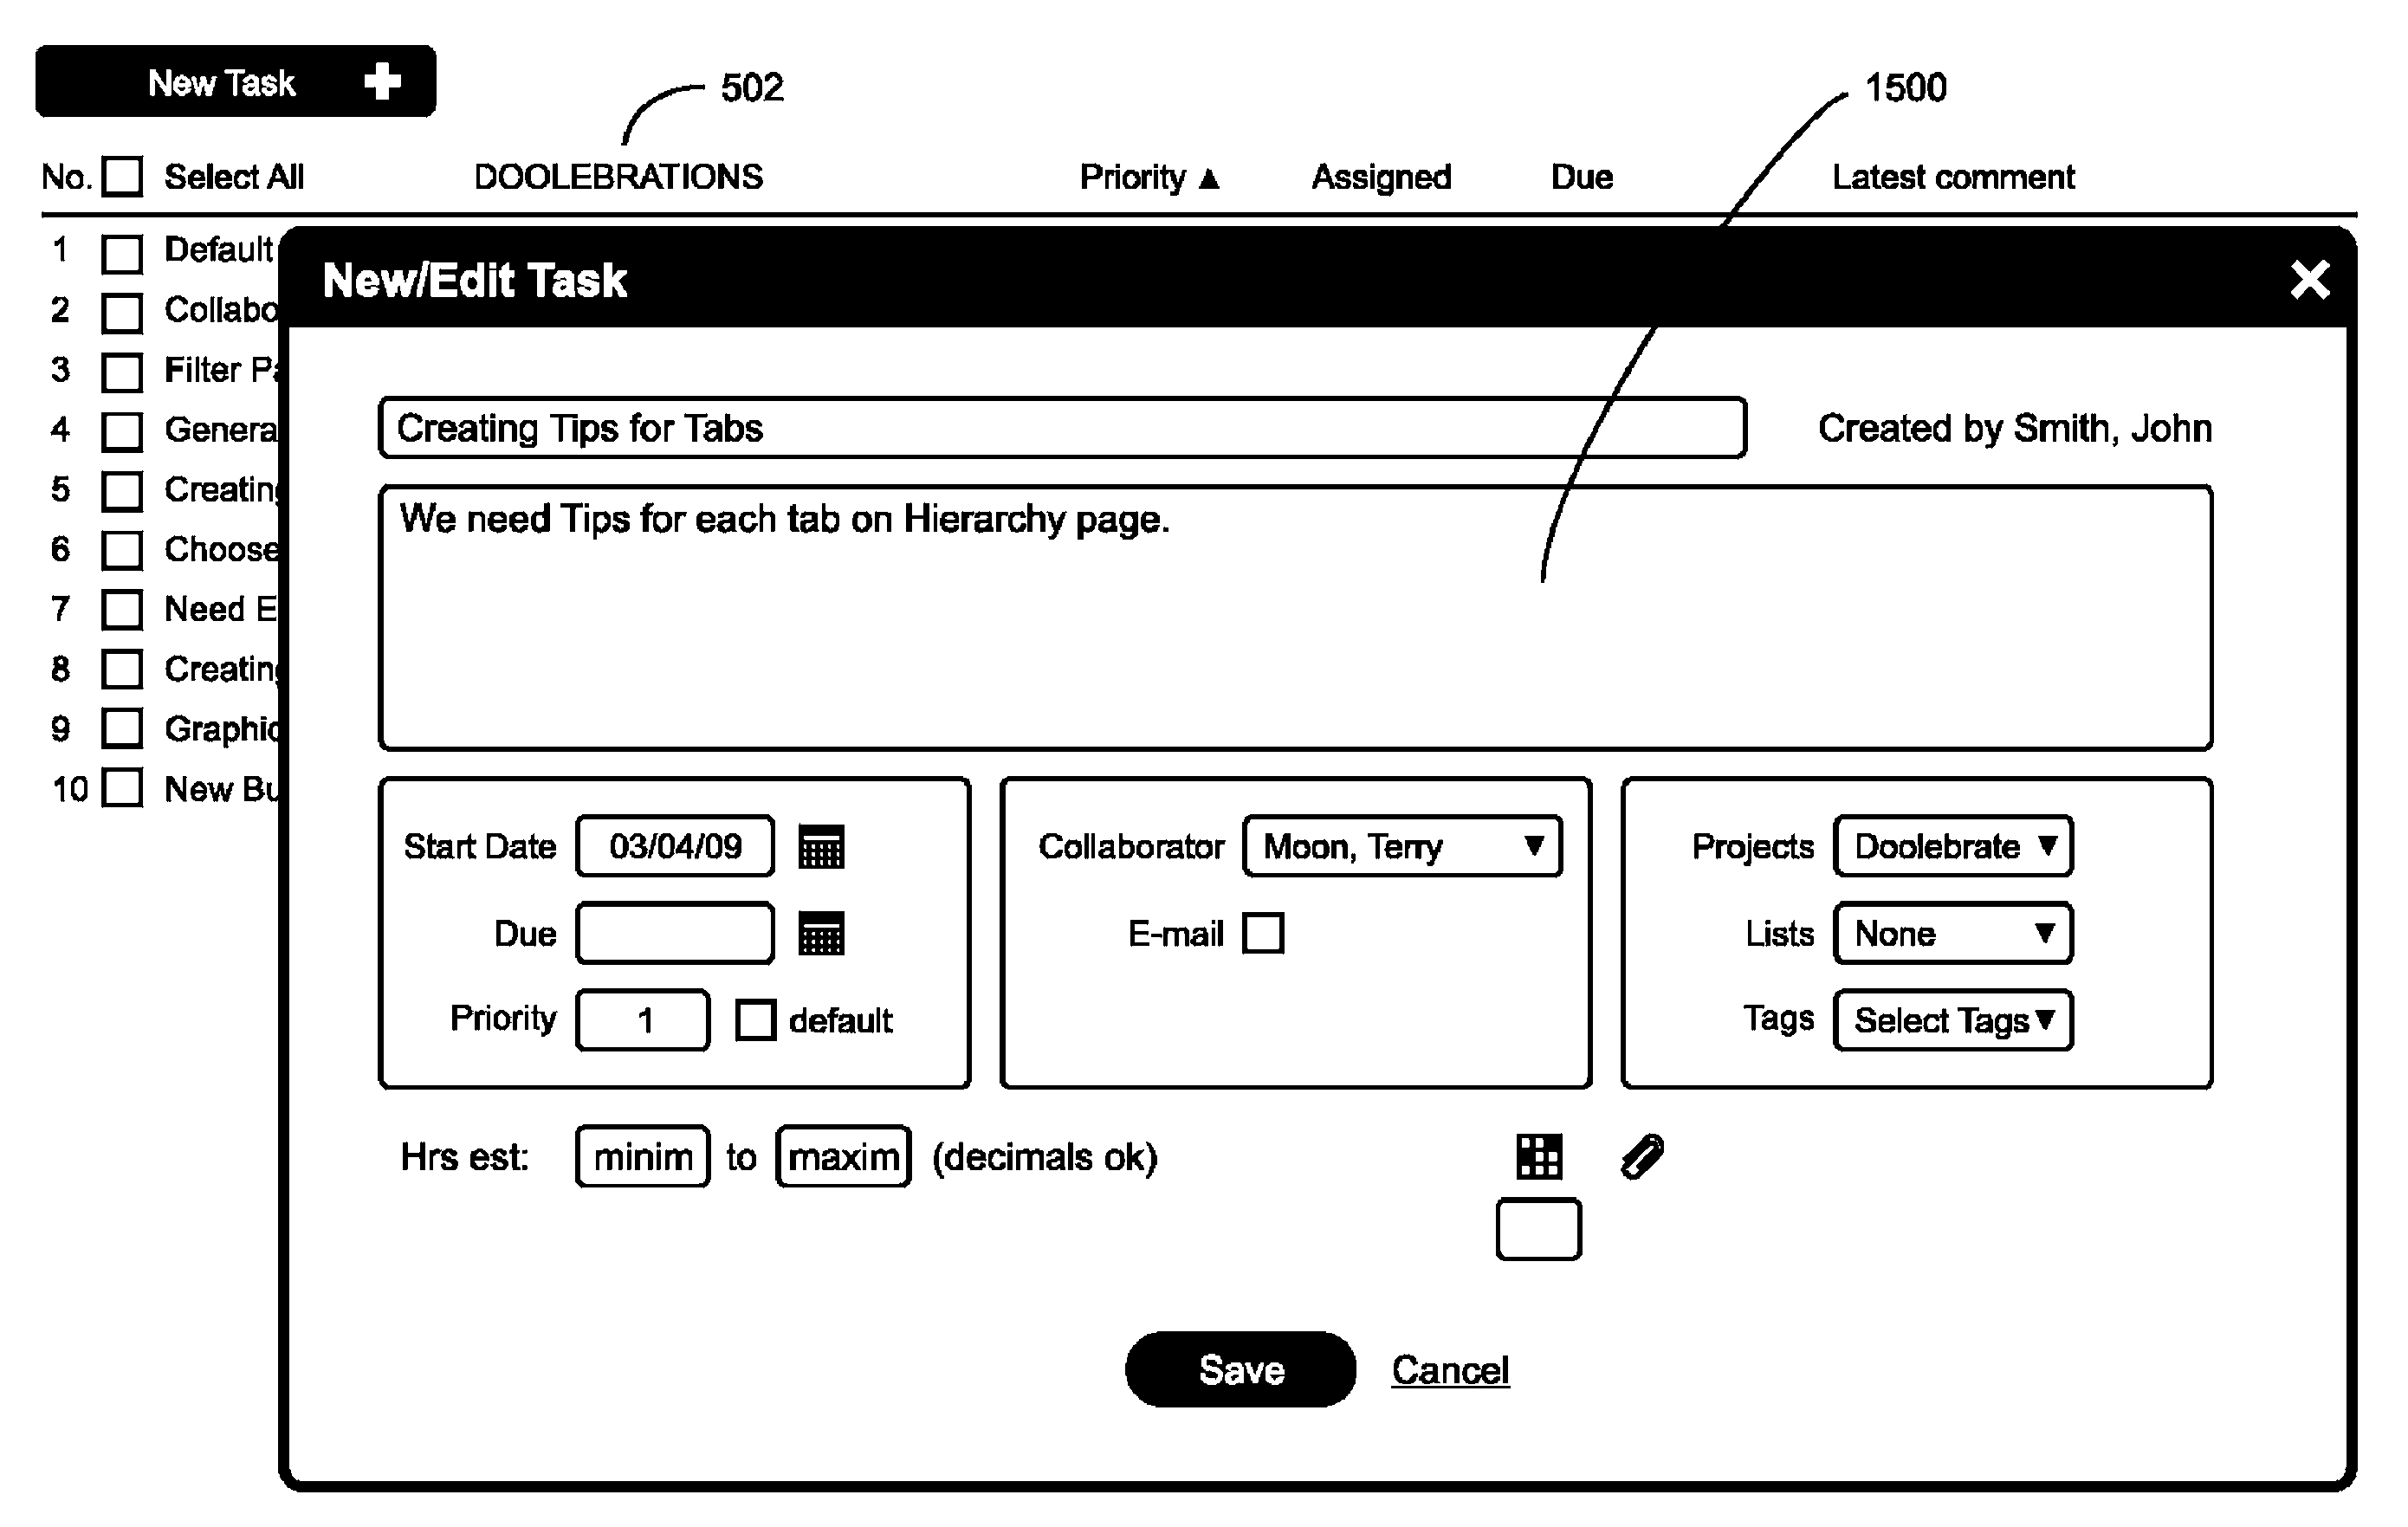 Simplified user interface and method for computerized task management systems